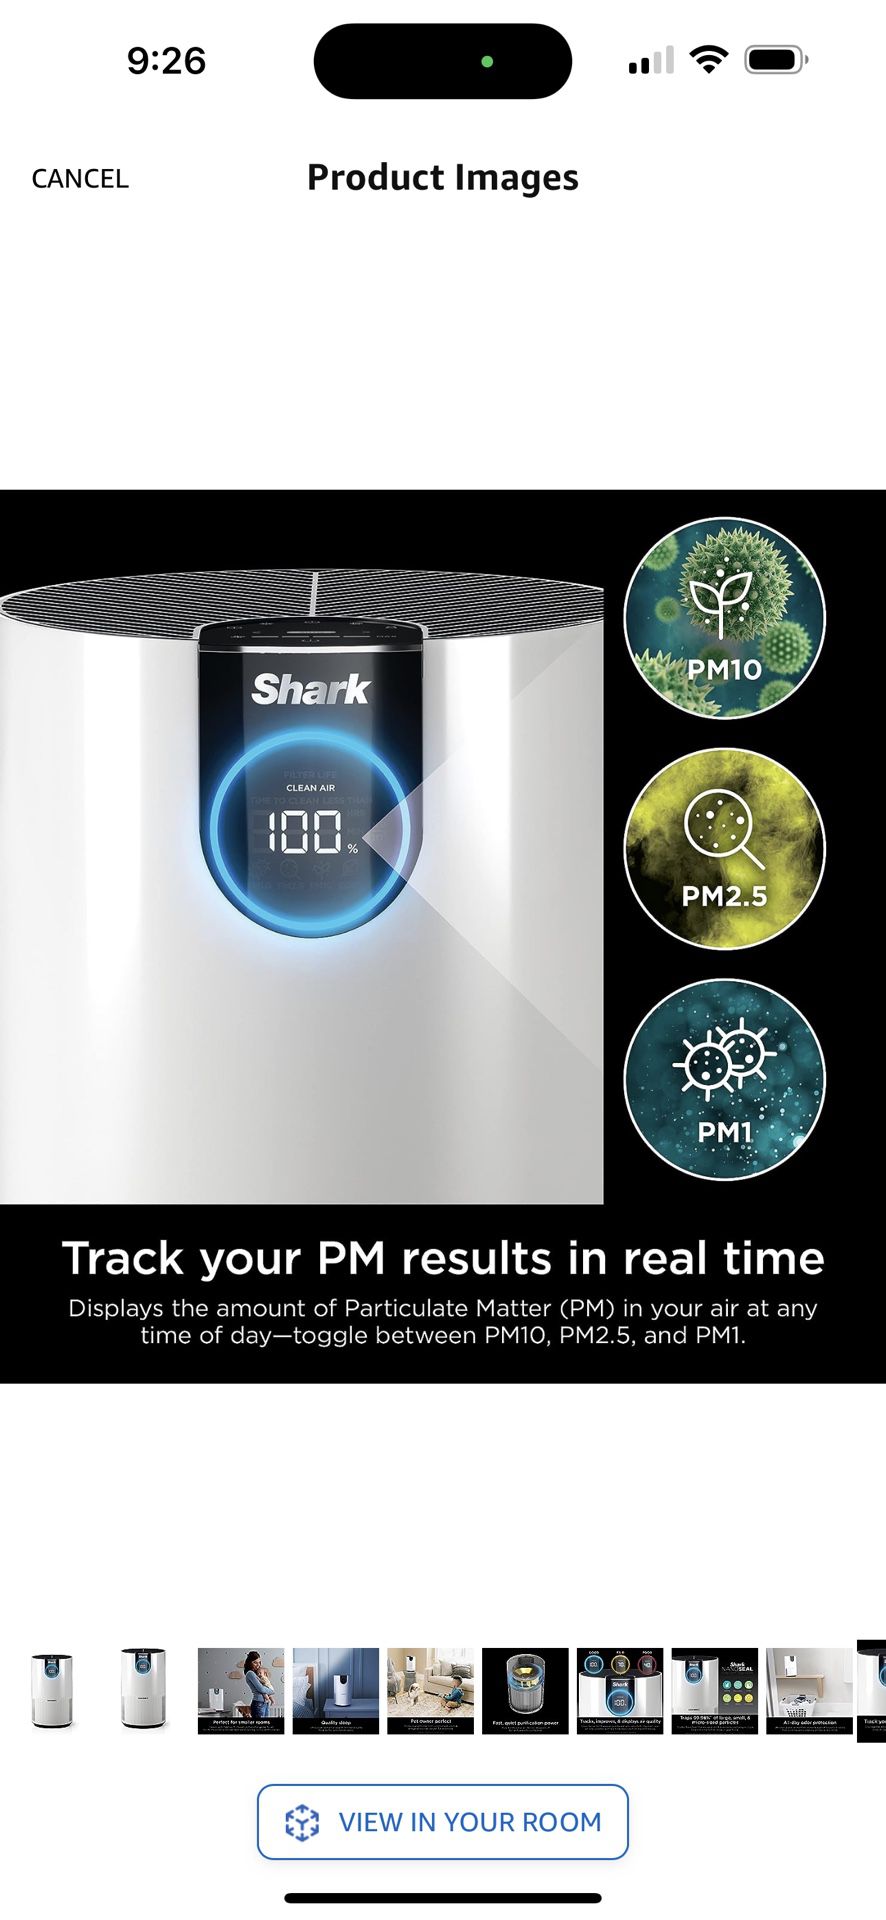 Shark HP102 Clean Sense Air Purifier for Home, Allergies, HEPA Filter, 500  Sq Ft, Small Room, Bedroom, Office, Captures 99.98% of Particles, Dust, Smo  for Sale in Lakeland, FL OfferUp